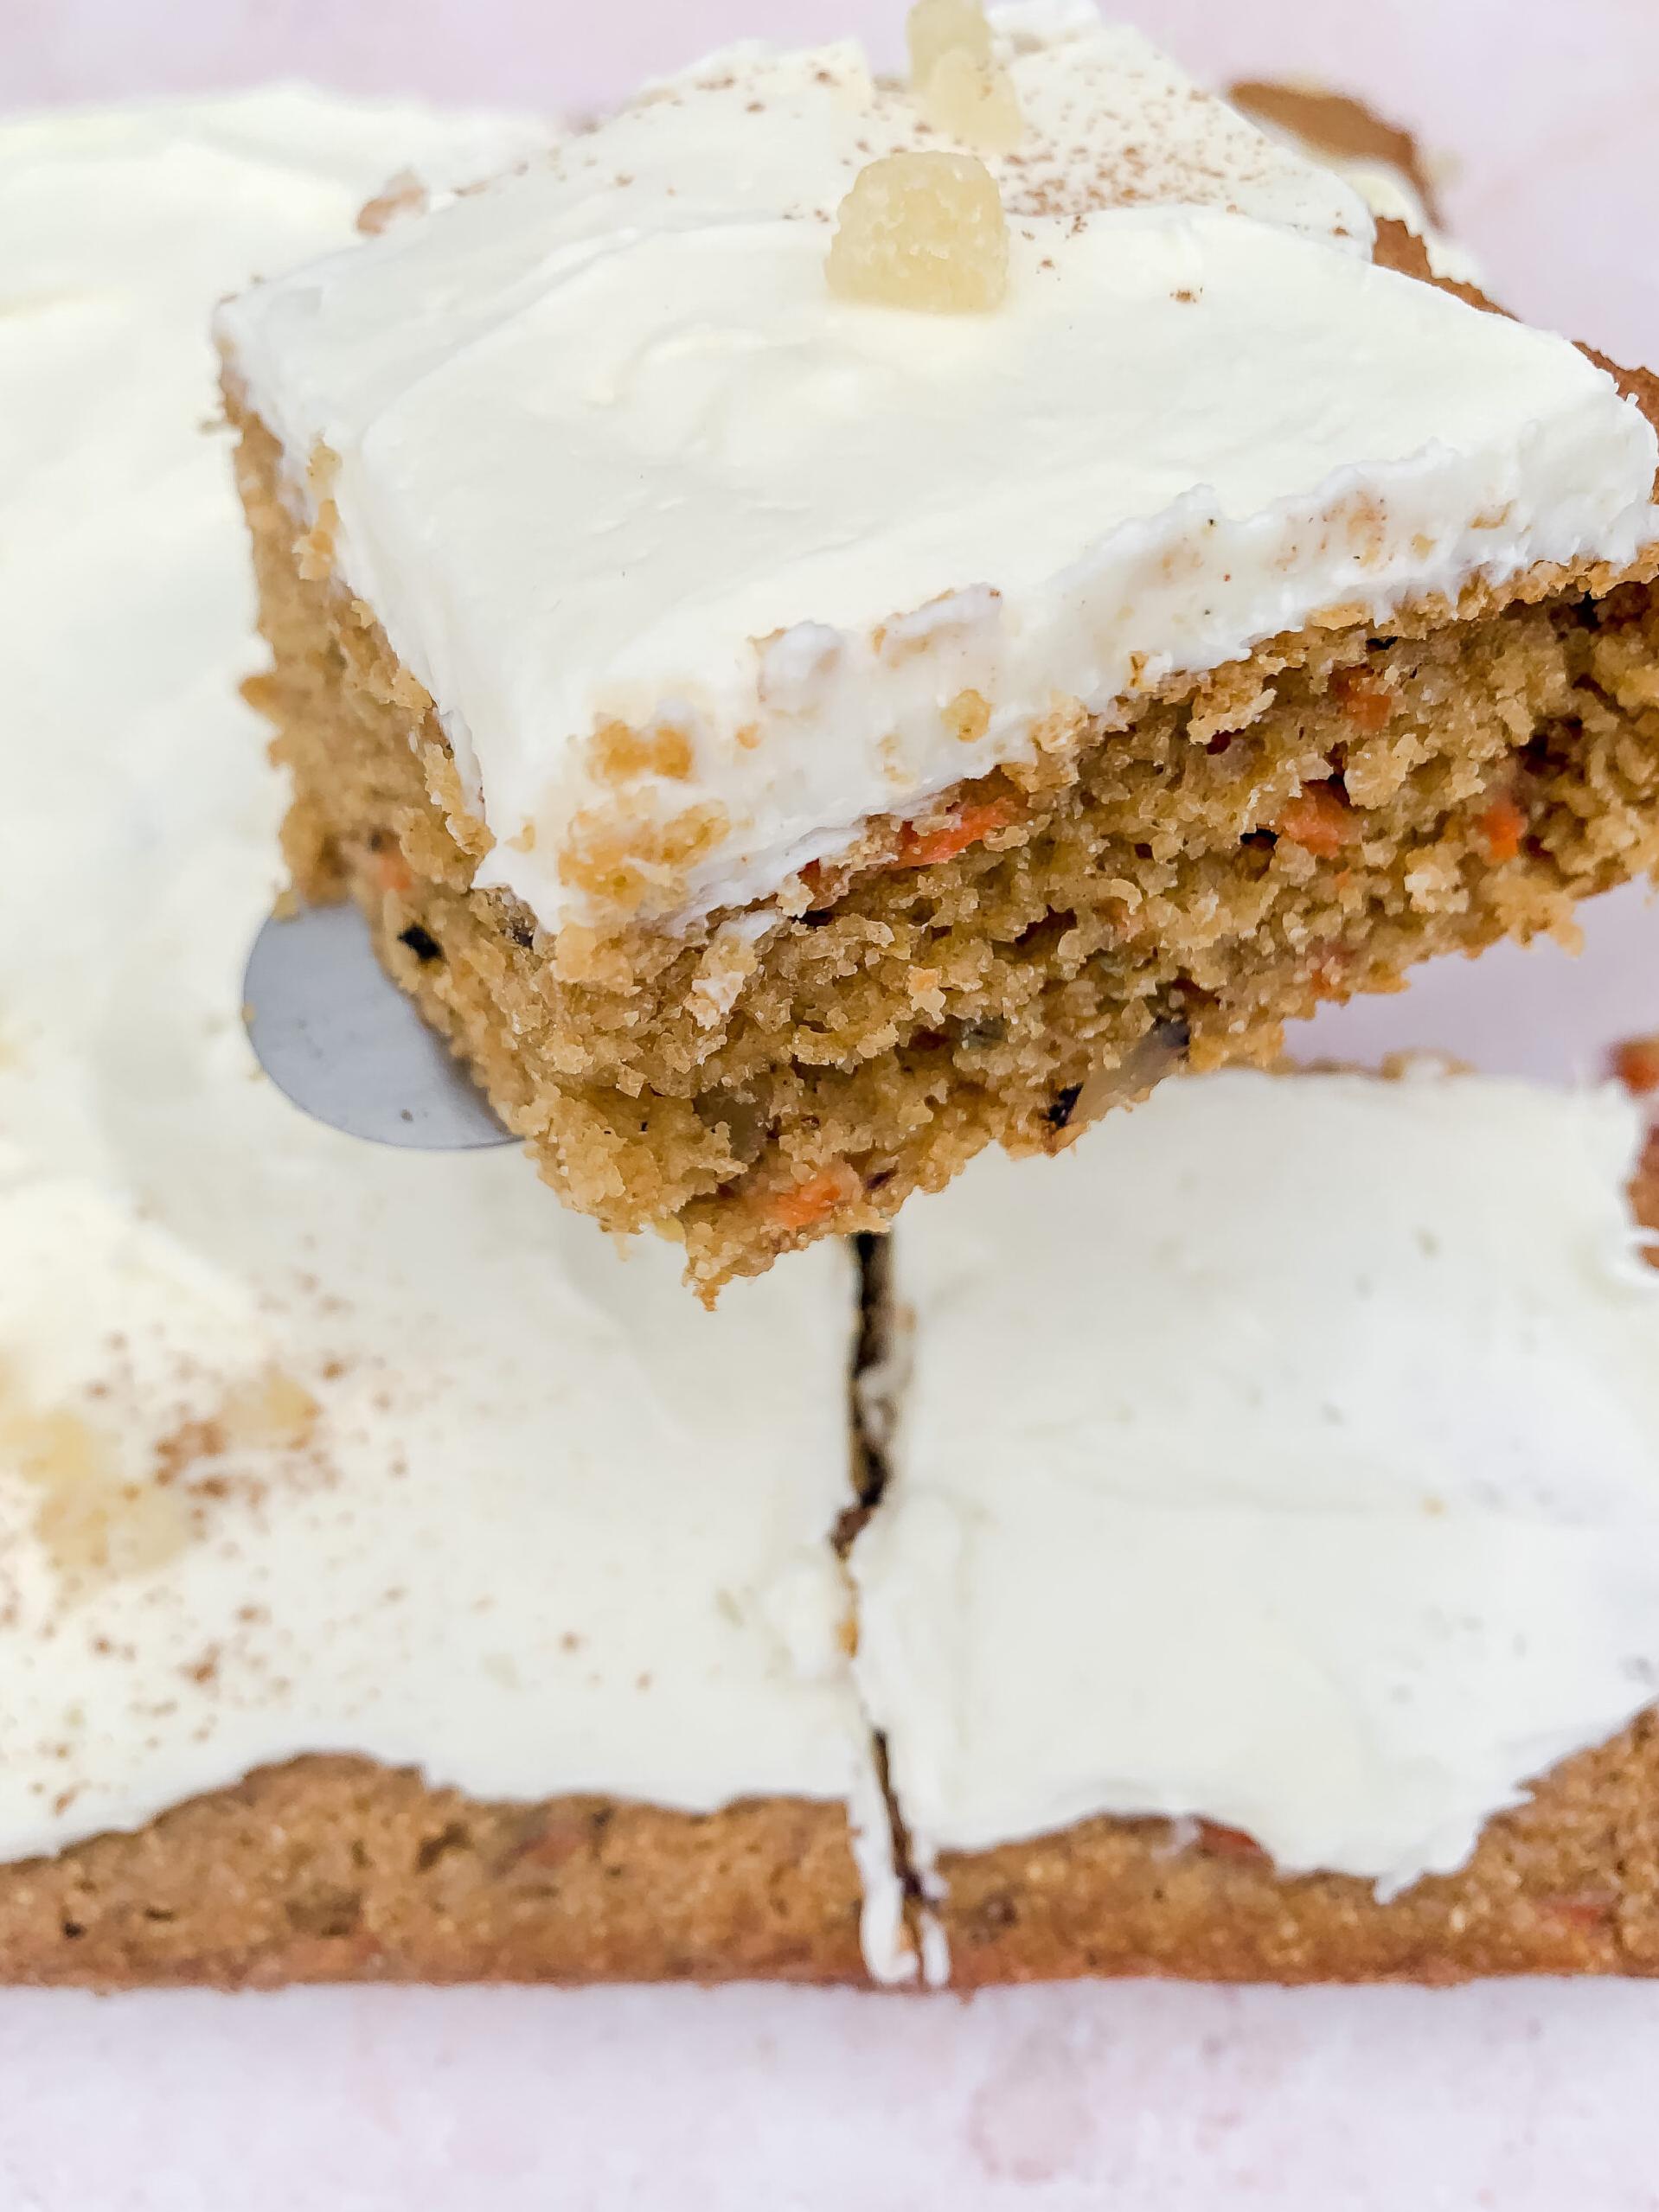  The classic carrot cake, with a twist!